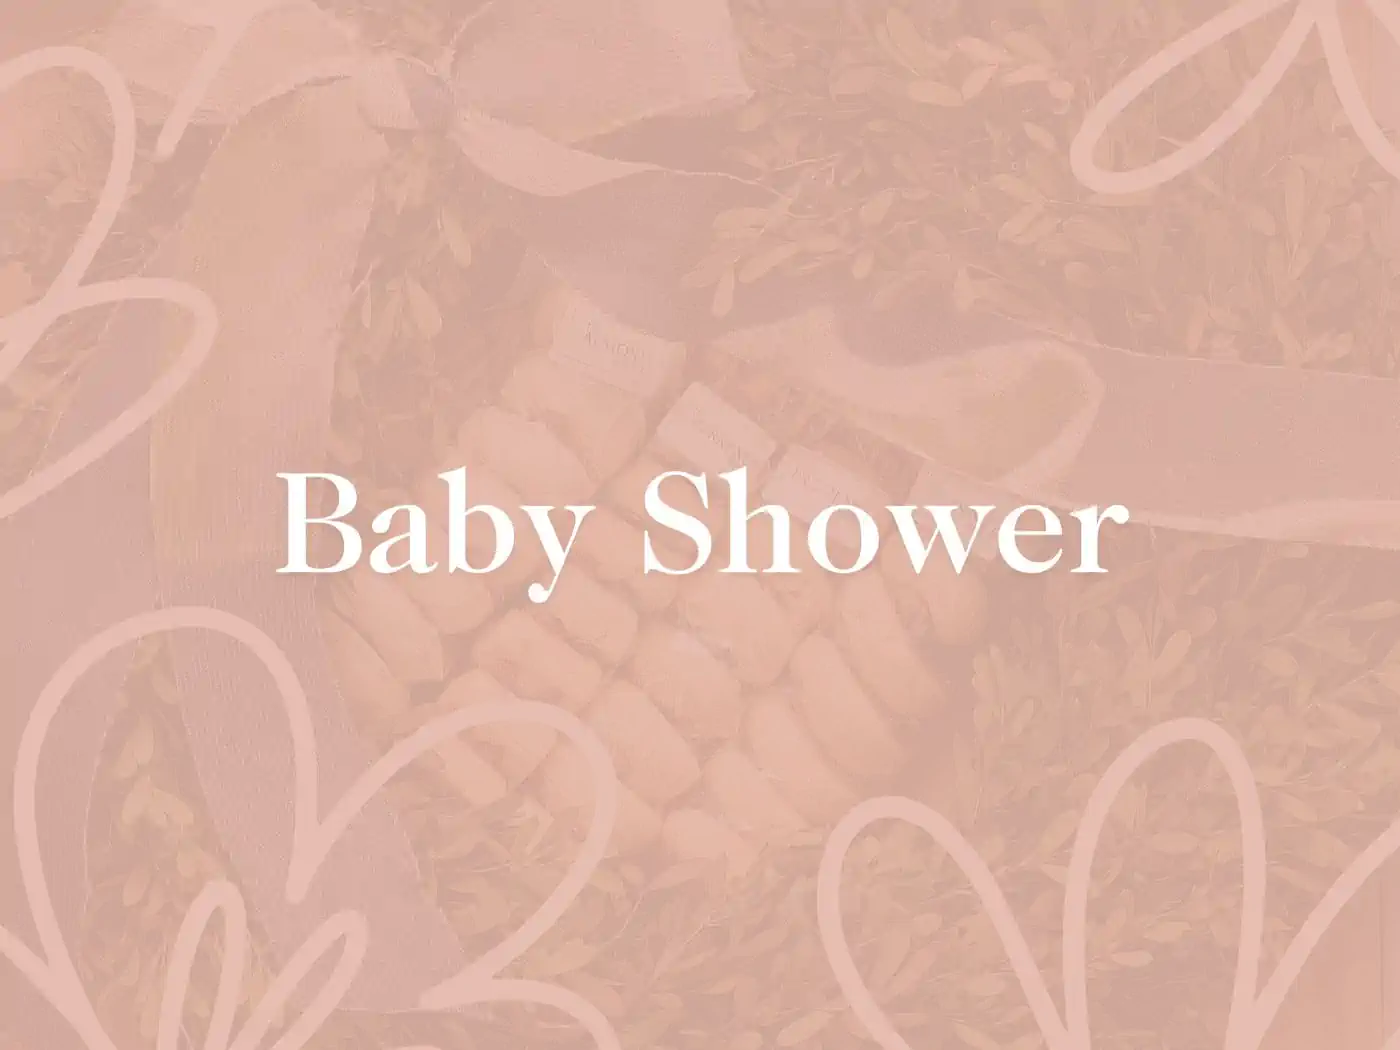 A decorative image for a Baby Shower collection featuring a pastel pink background adorned with heart-shaped outlines. A large ribbon bow is visible, accentuating the elegant presentation. In the background, there are subtle images of floral arrangements and small gift boxes, suggesting a theme of fabulous flowers and gifts.